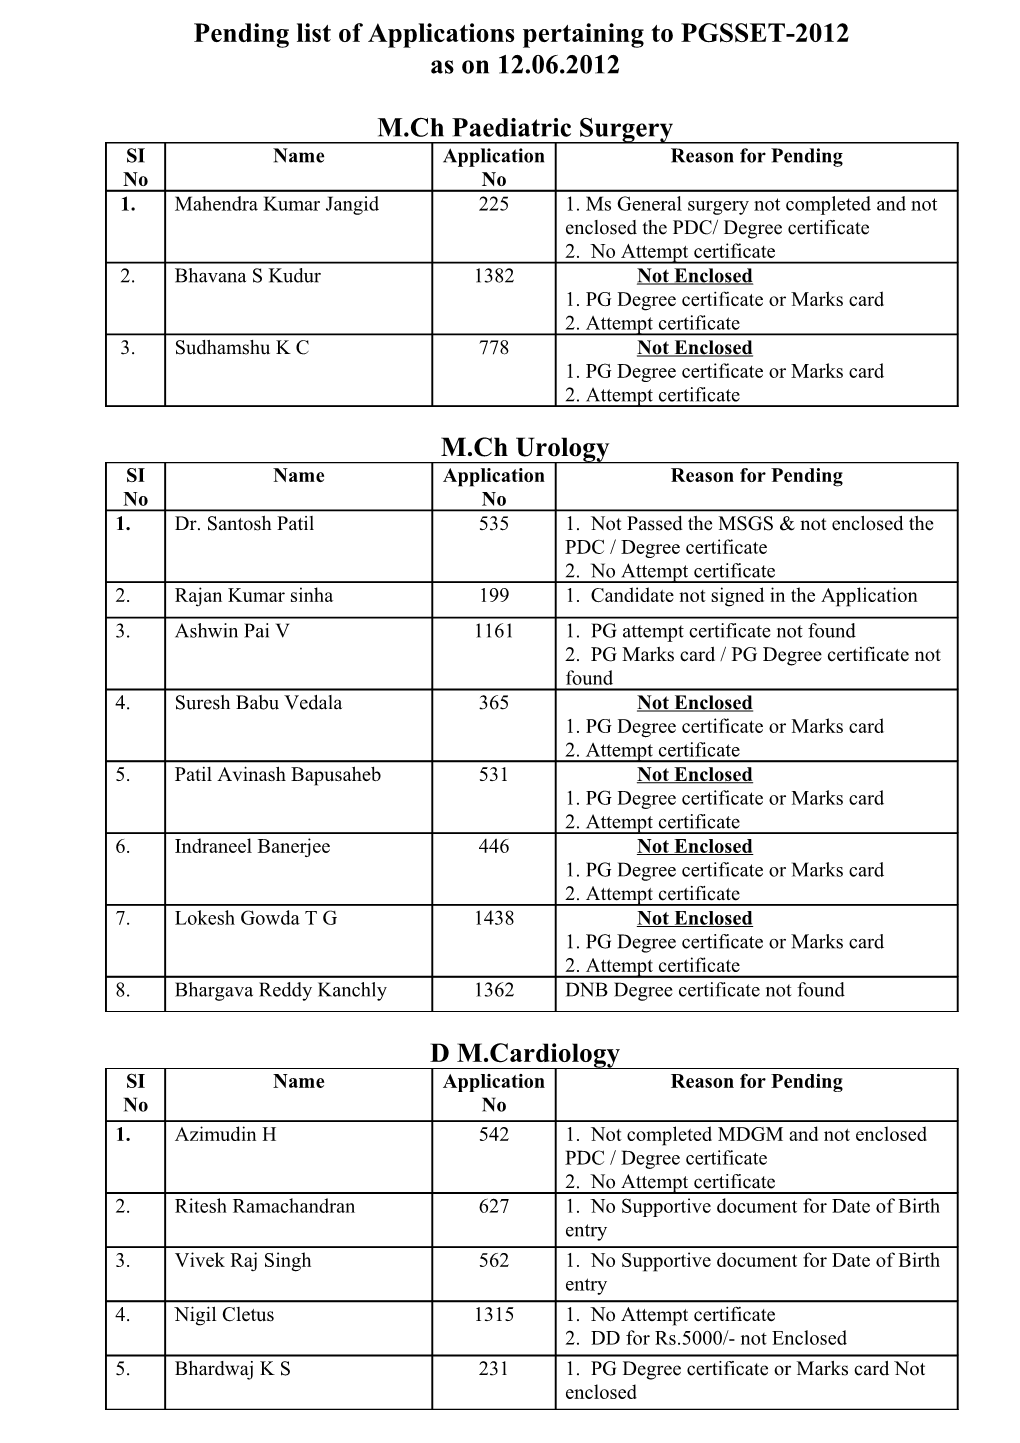 Pending List of Applications Pertaining to PGSSET-2012